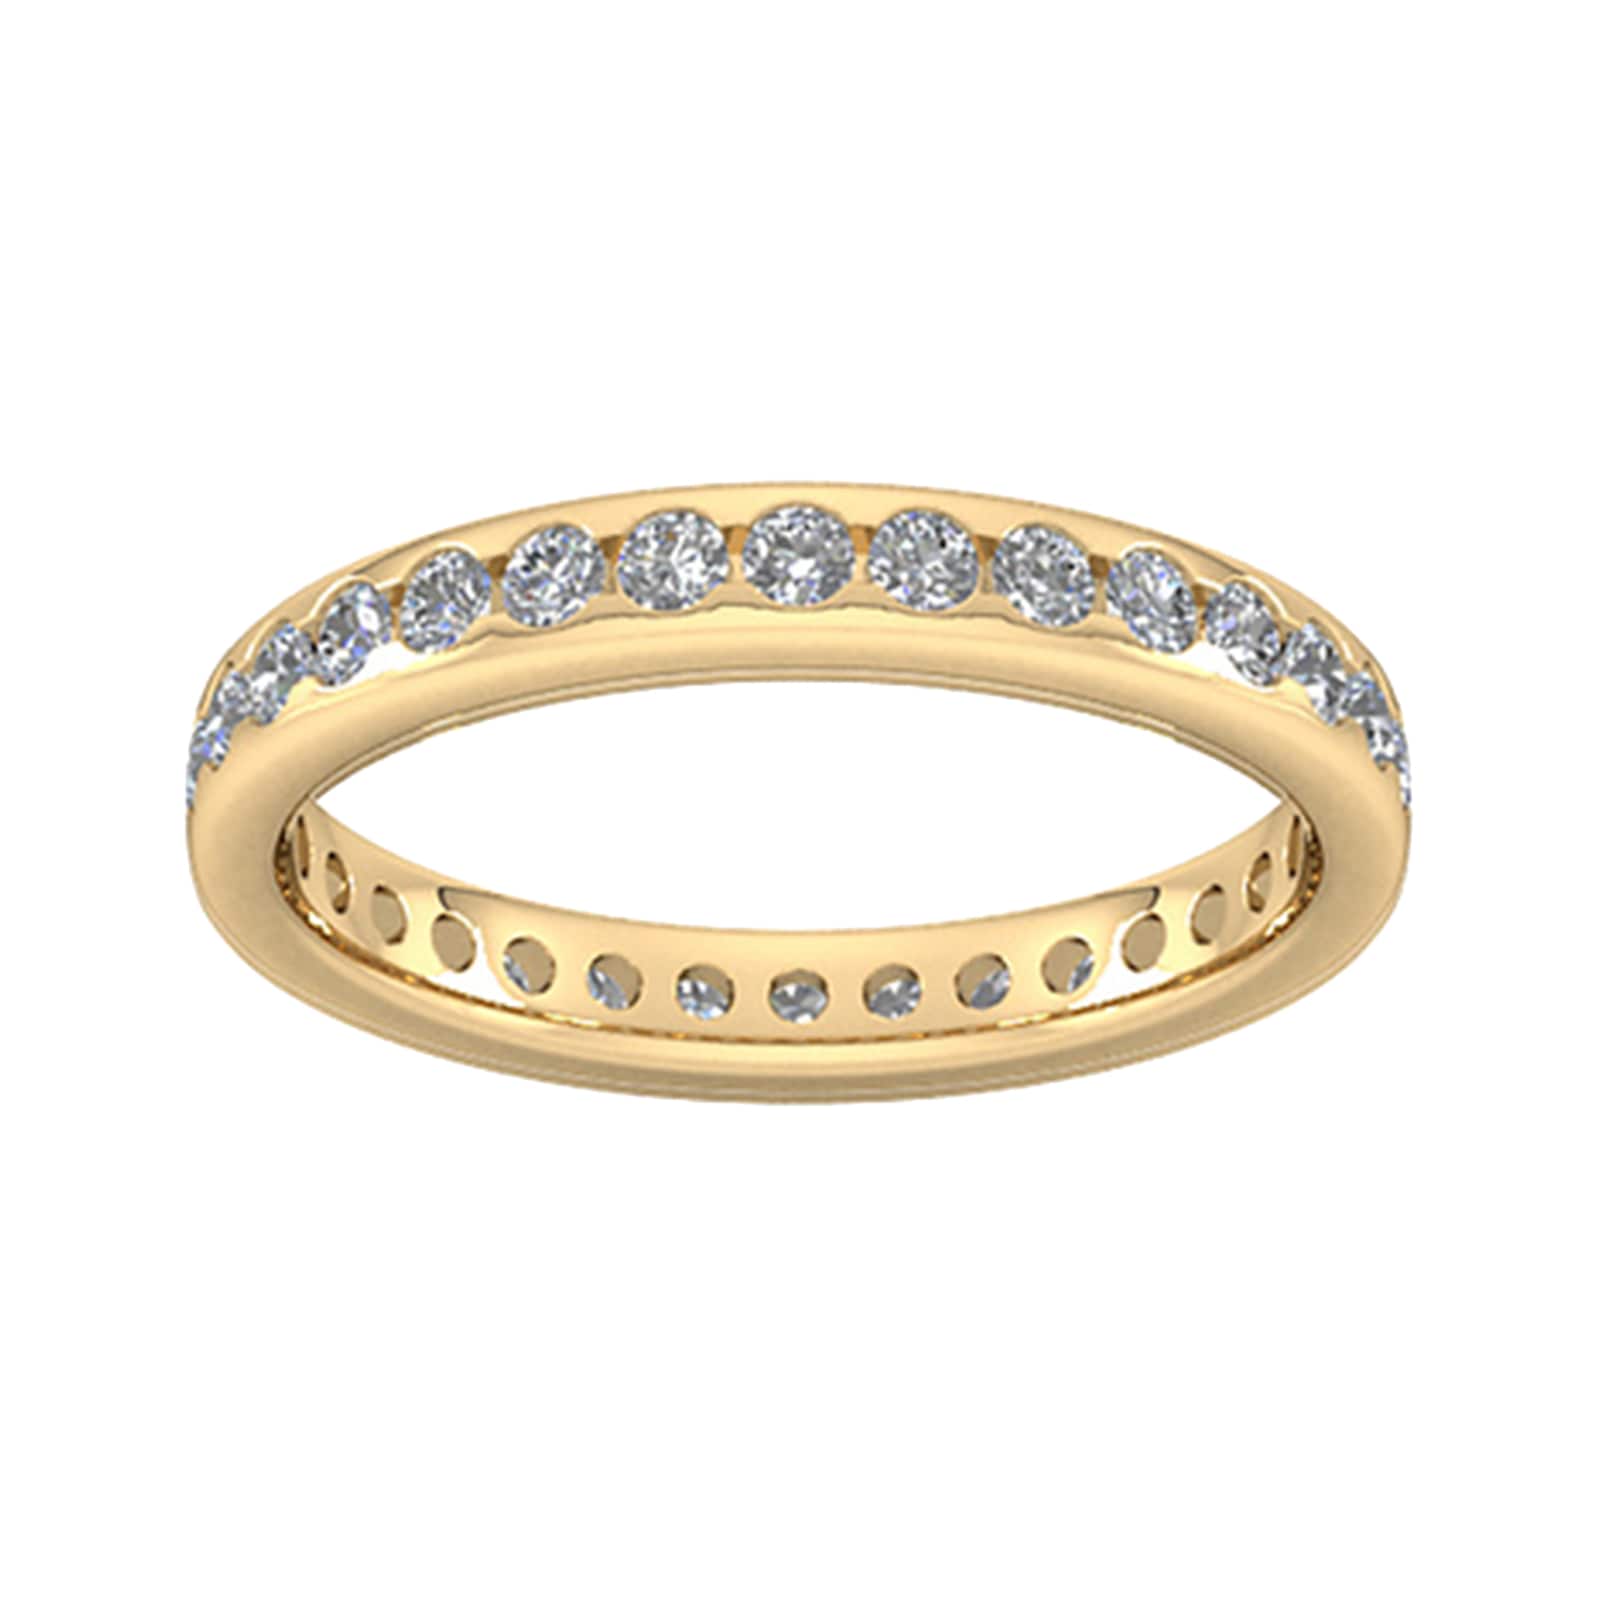 0.81 Carat Total Weight Brilliant Cut Scalloped Channel Set Diamond Wedding Ring In 18 Carat Yellow Gold - Ring Size R